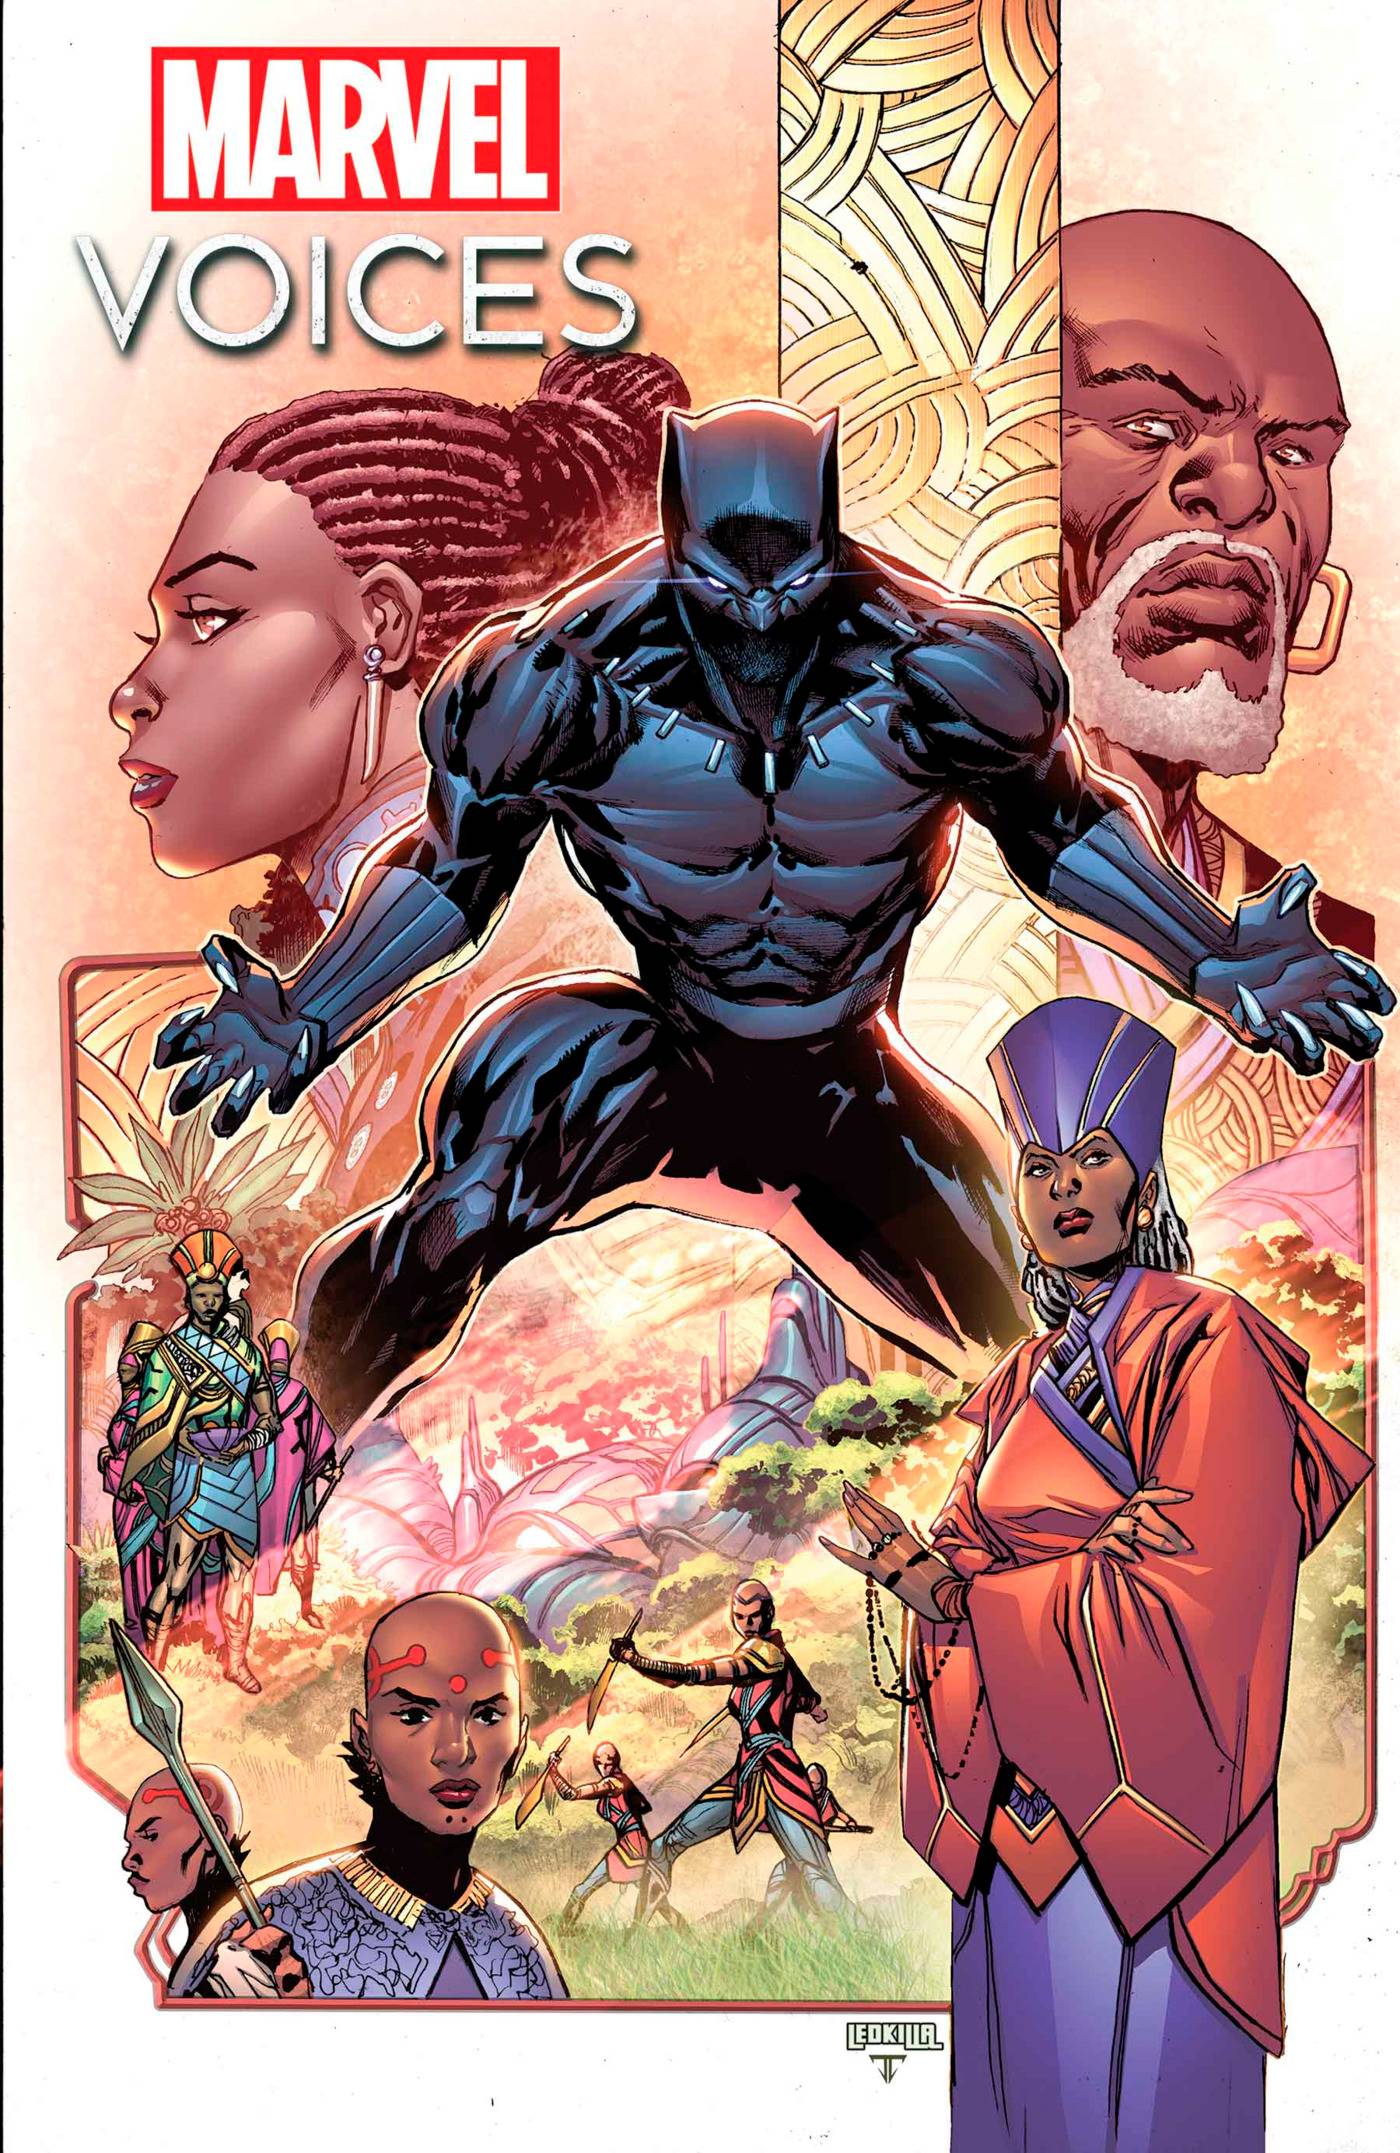 MARVELS VOICES WAKANDA FOREVER #1